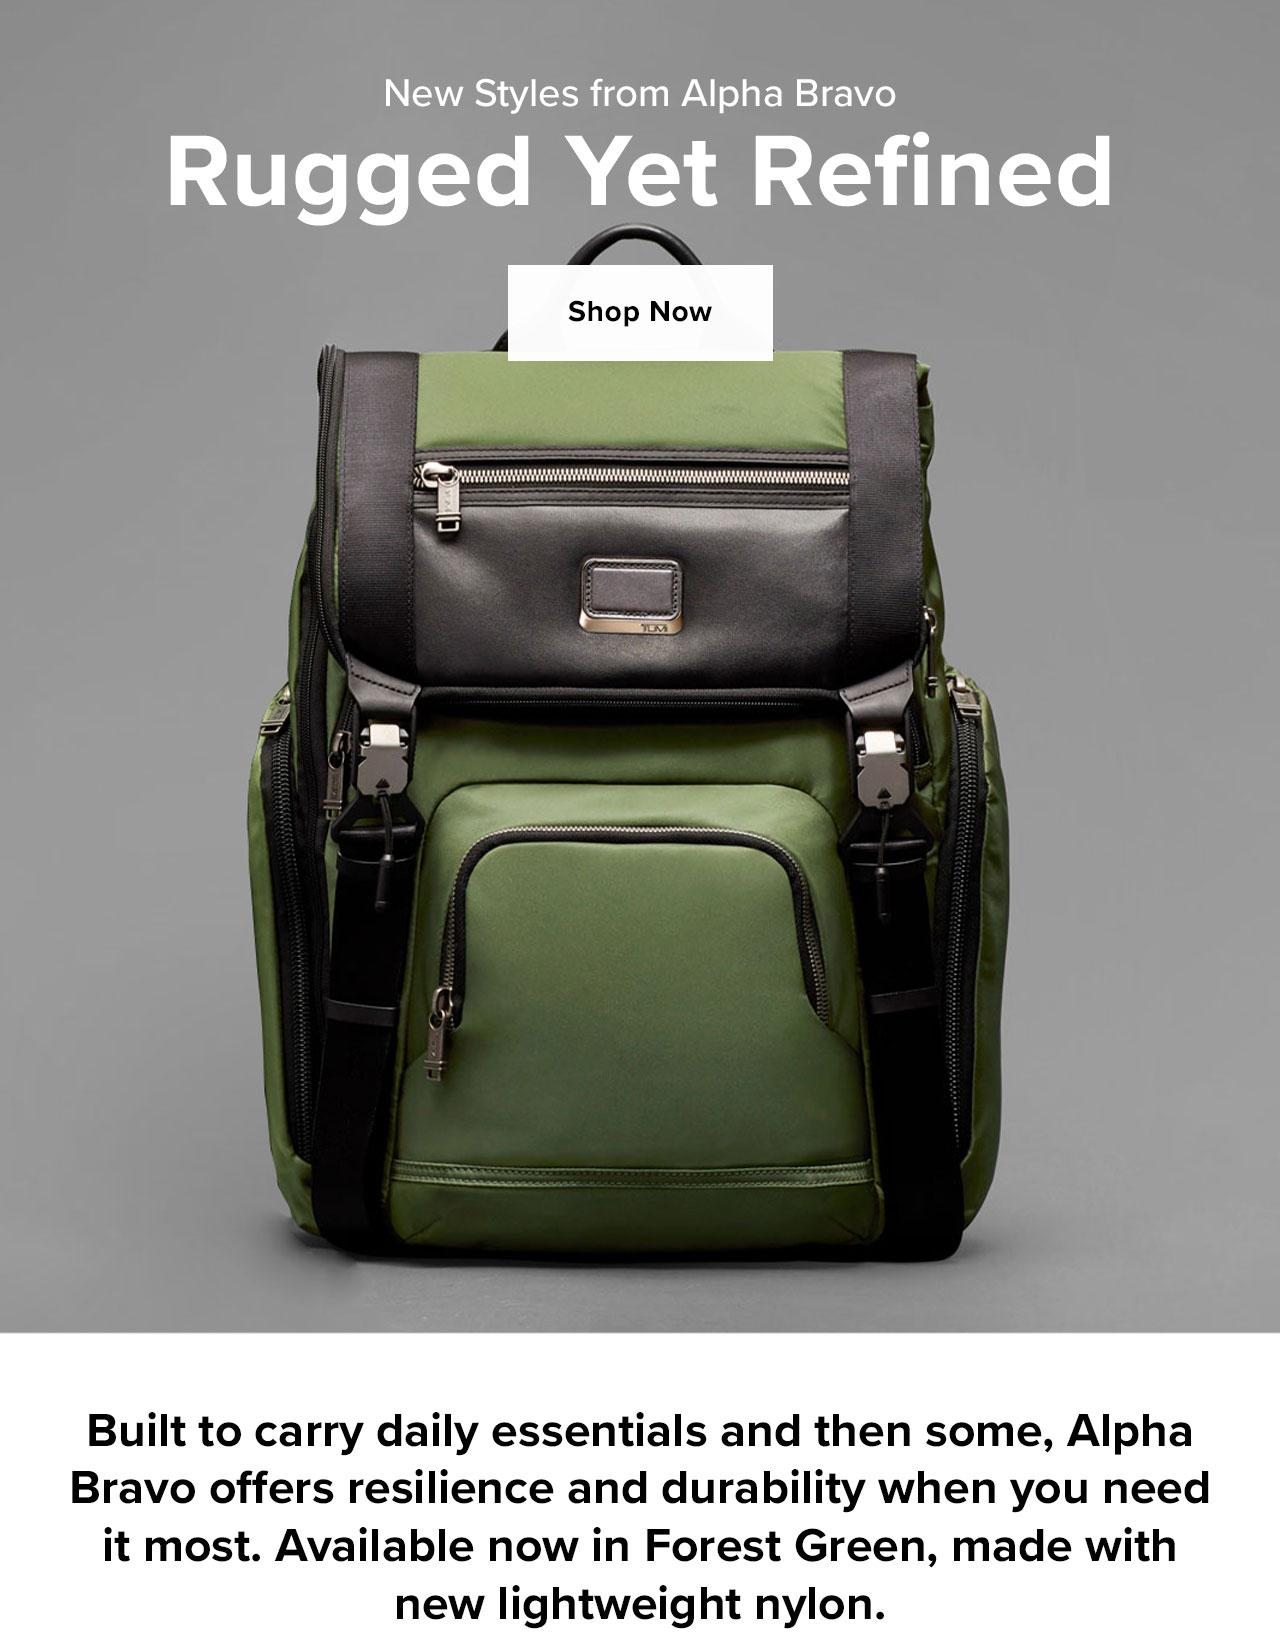 Rugged Yet Refined - New Alpha Bravo - Shop Now